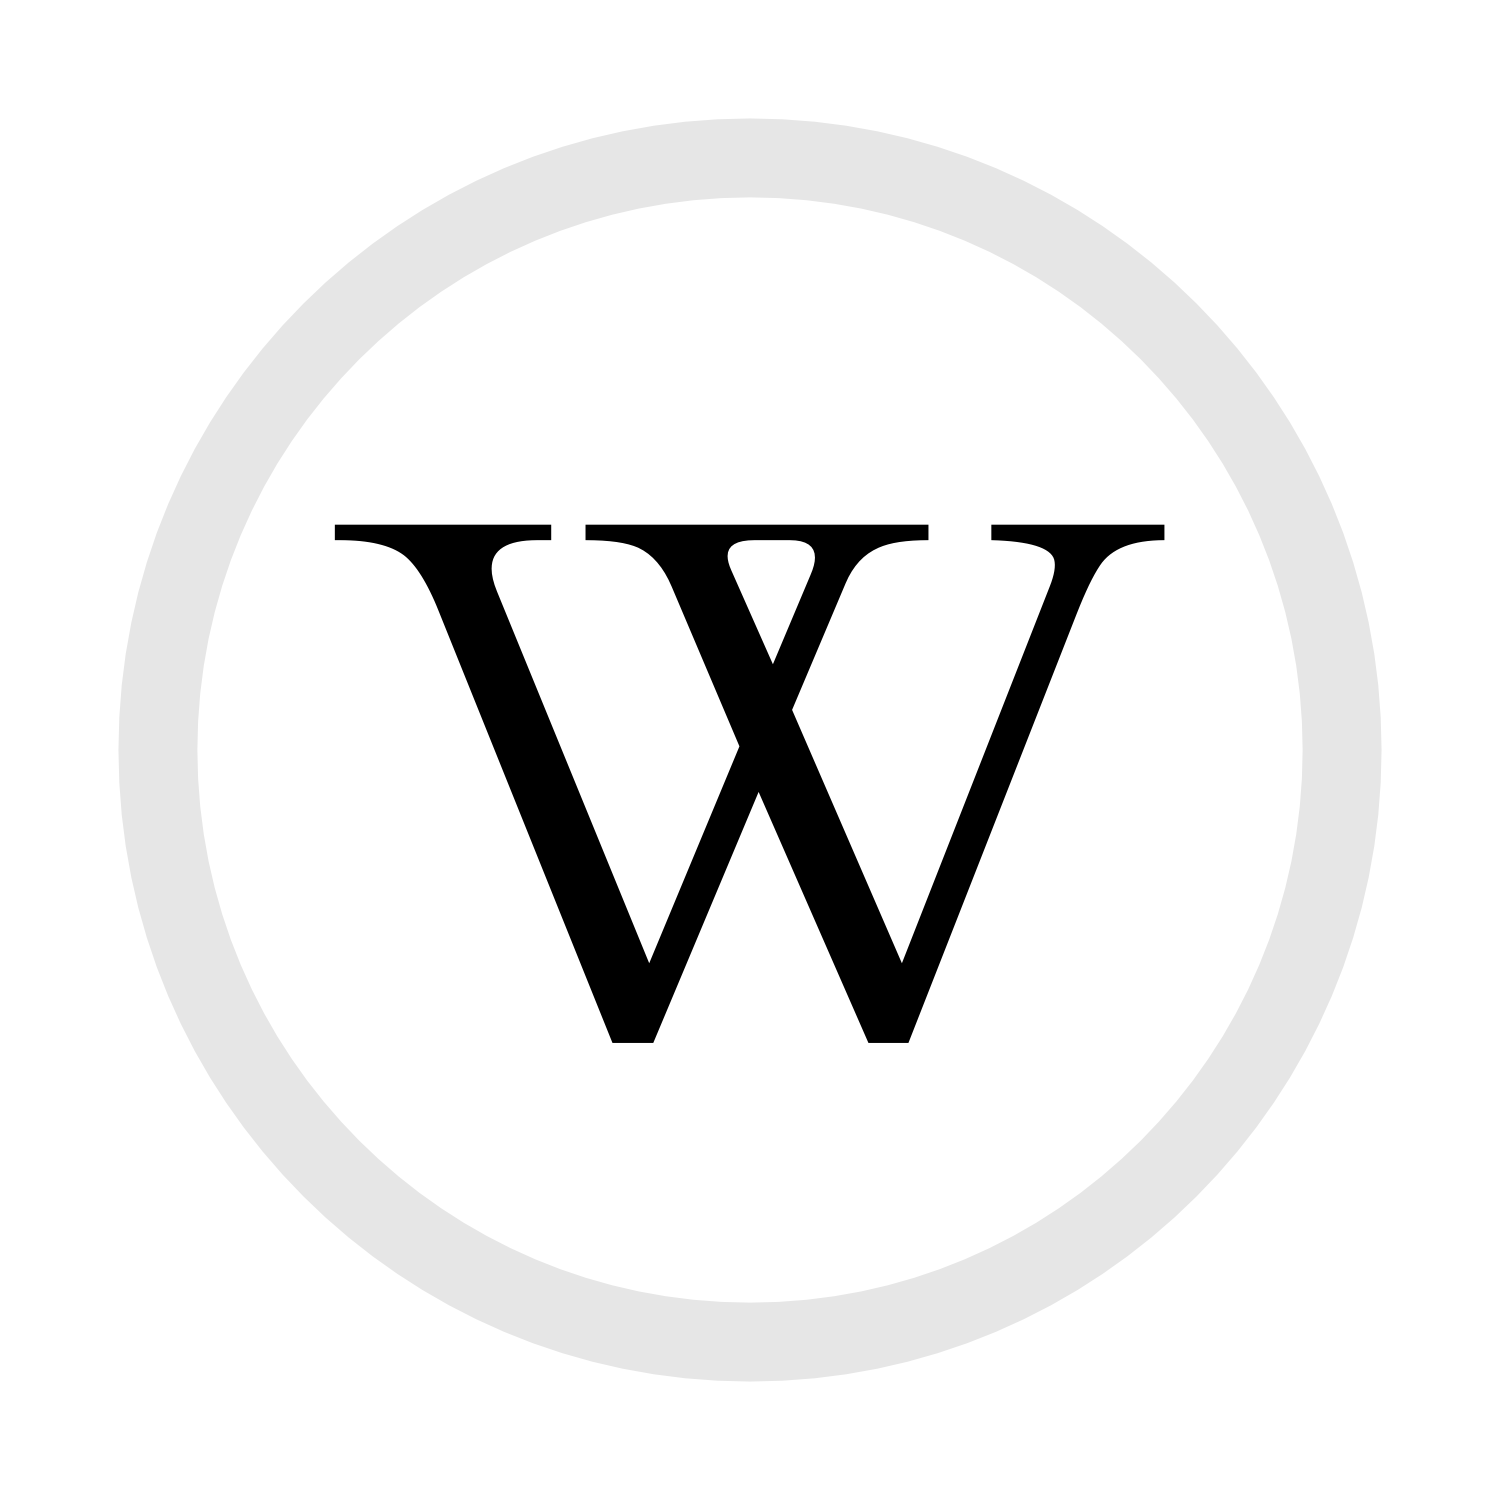 File:W in circle.png - Wikimedia Commons